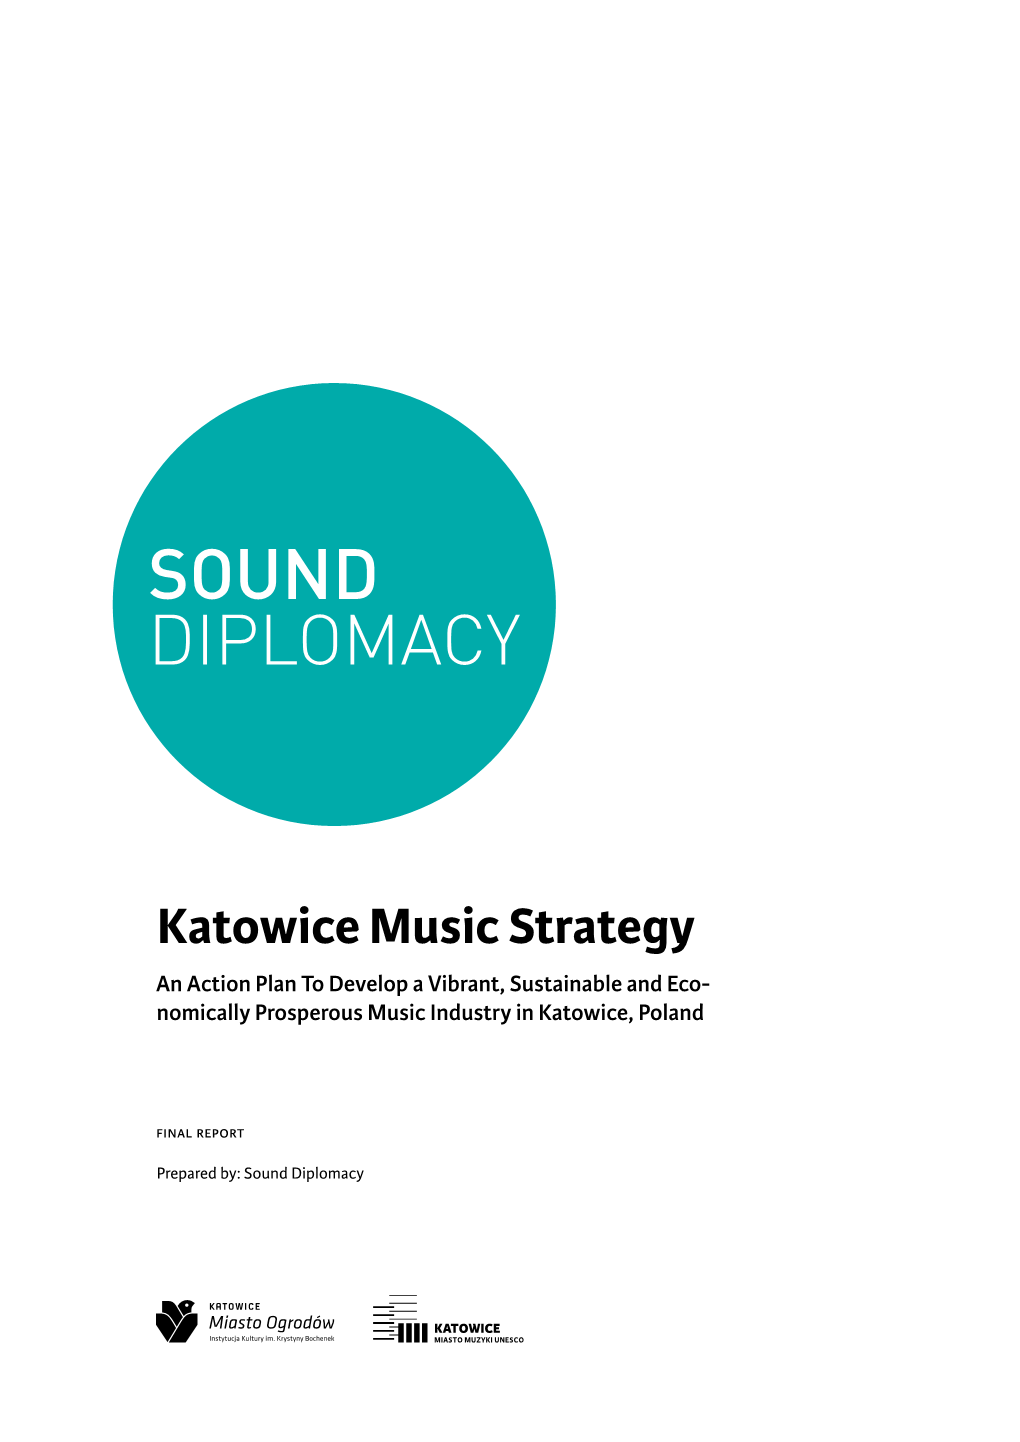 Katowice Music Strategy an Action Plan to Develop a Vibrant, Sustainable and Eco- Nomically Prosperous Music Industry in Katowice, Poland